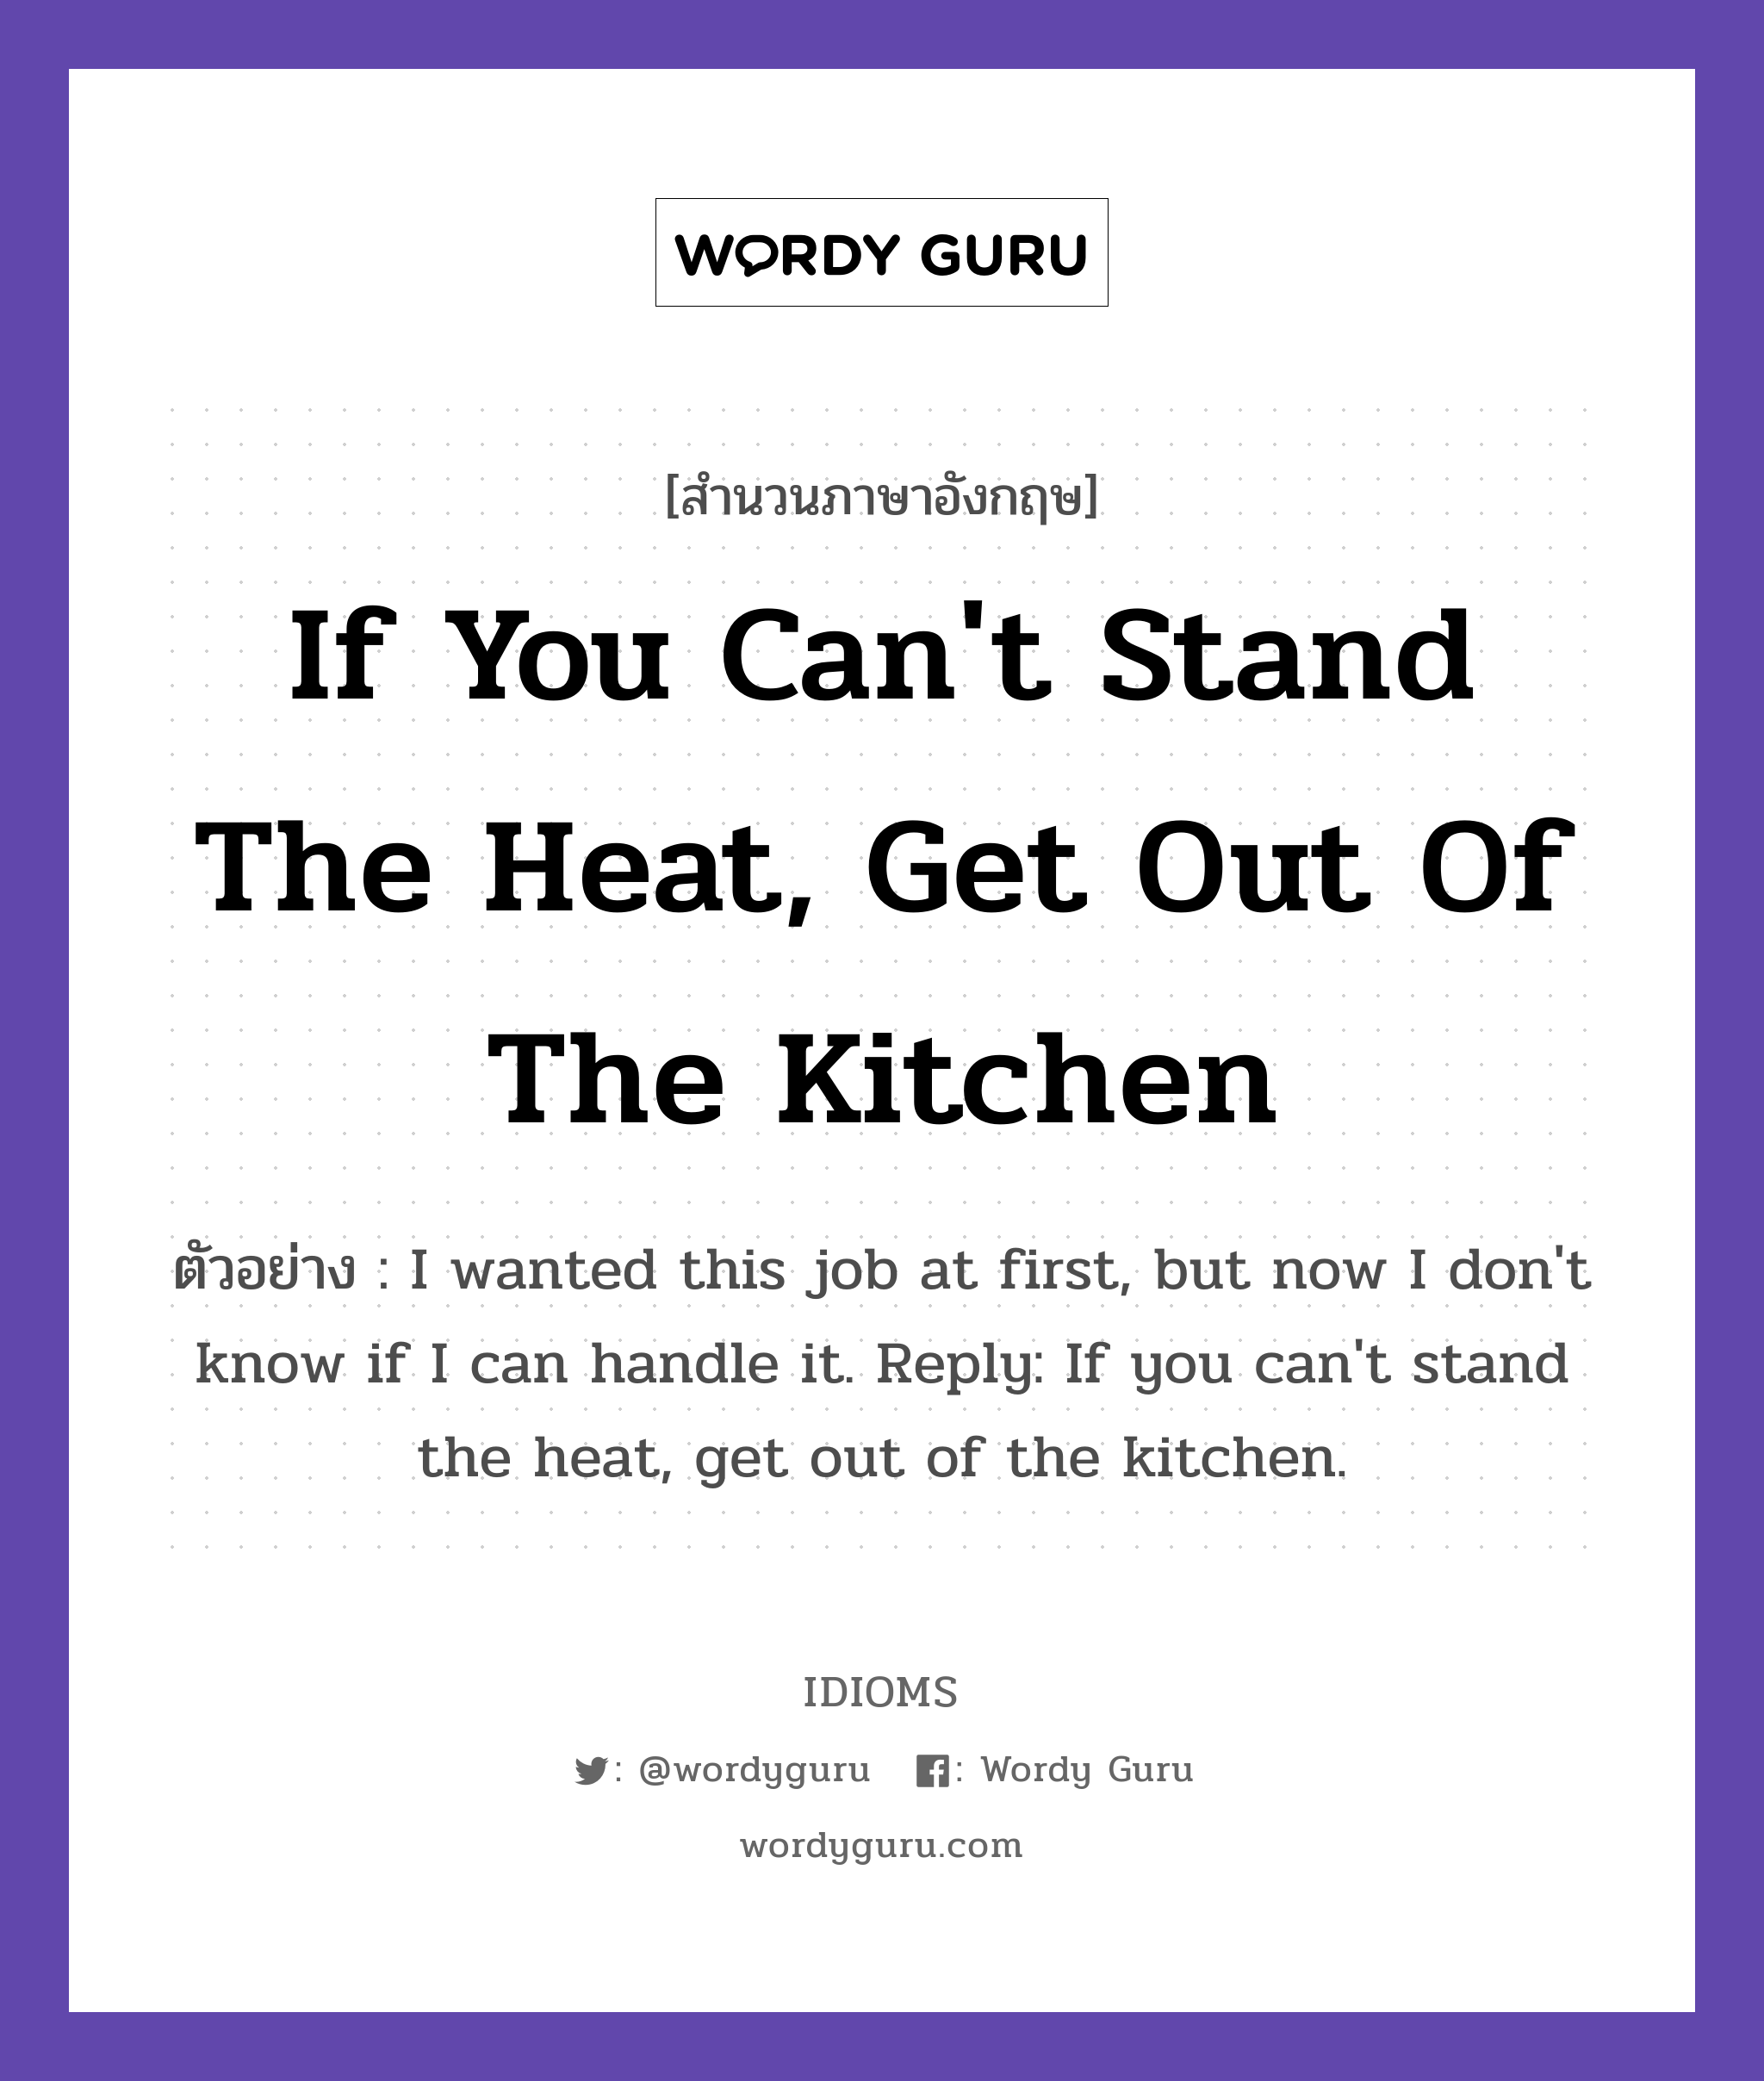 If You Can't Stand The Heat, Get Out Of The Kitchen แปลว่า?, สำนวนภาษาอังกฤษ If You Can't Stand The Heat, Get Out Of The Kitchen ตัวอย่าง I wanted this job at first, but now I don't know if I can handle it. Reply: If you can't stand the heat, get out of the kitchen.